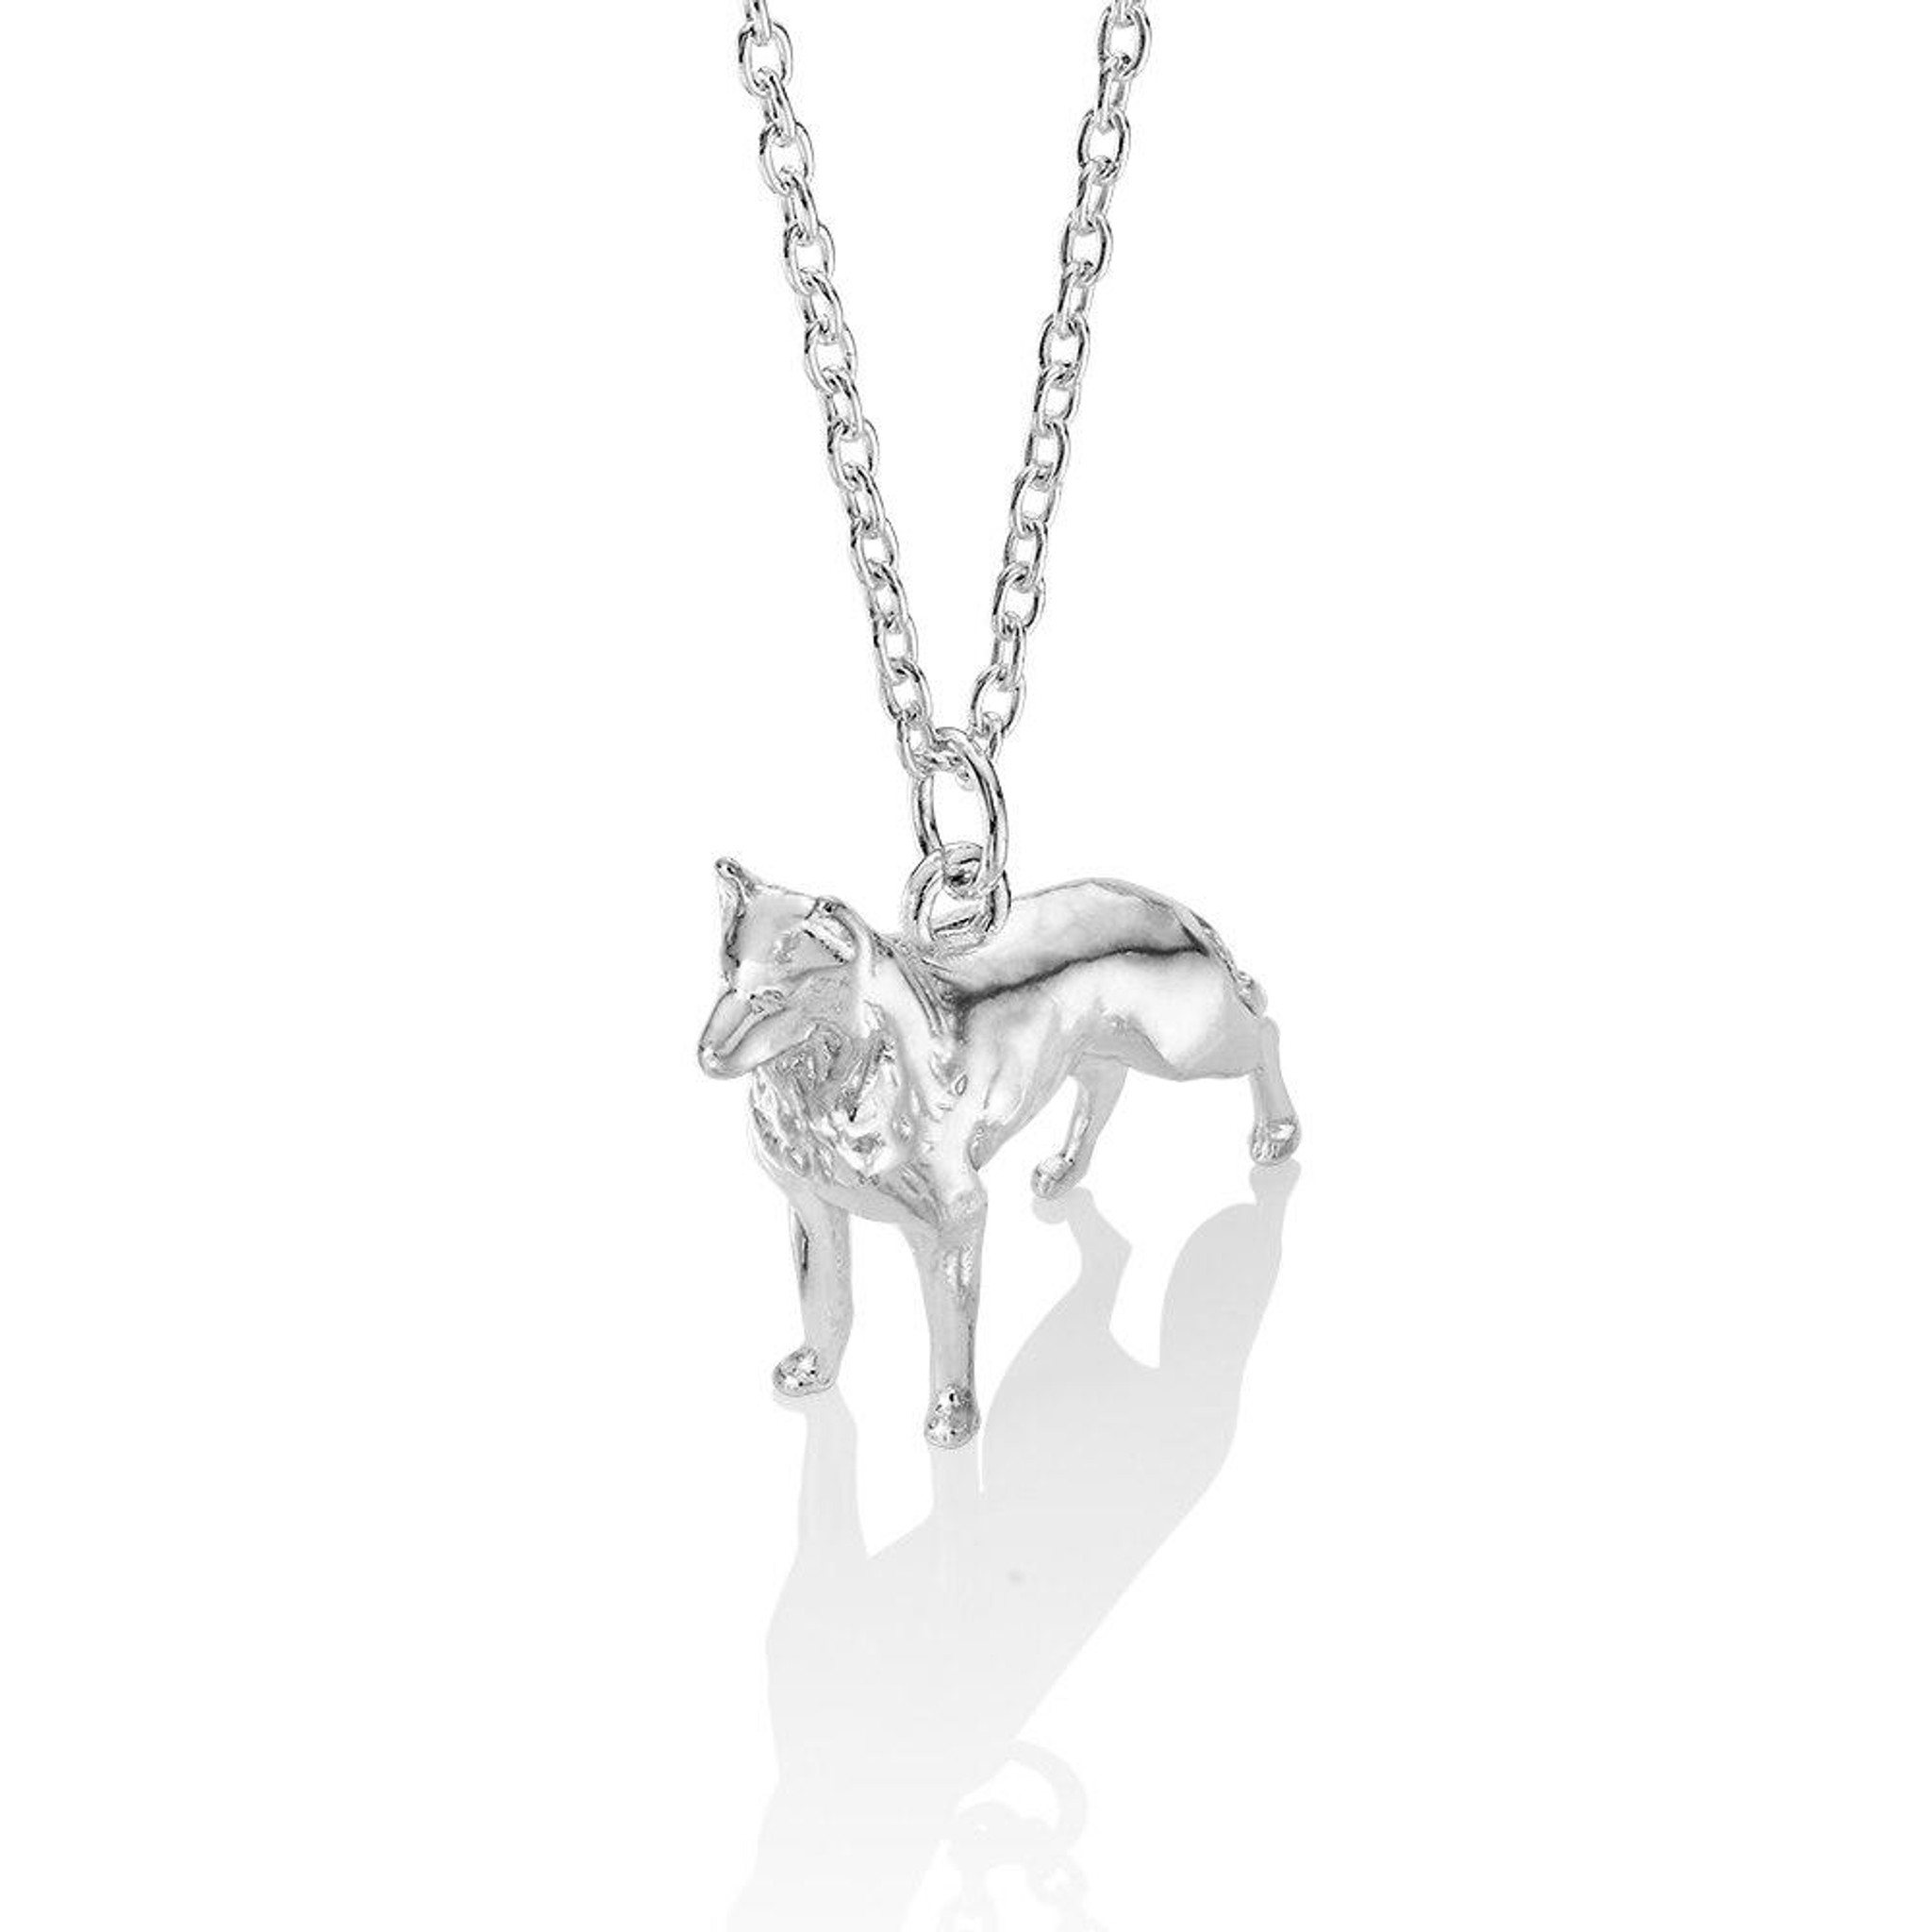 german shepherd pendant made from solid sterling silver